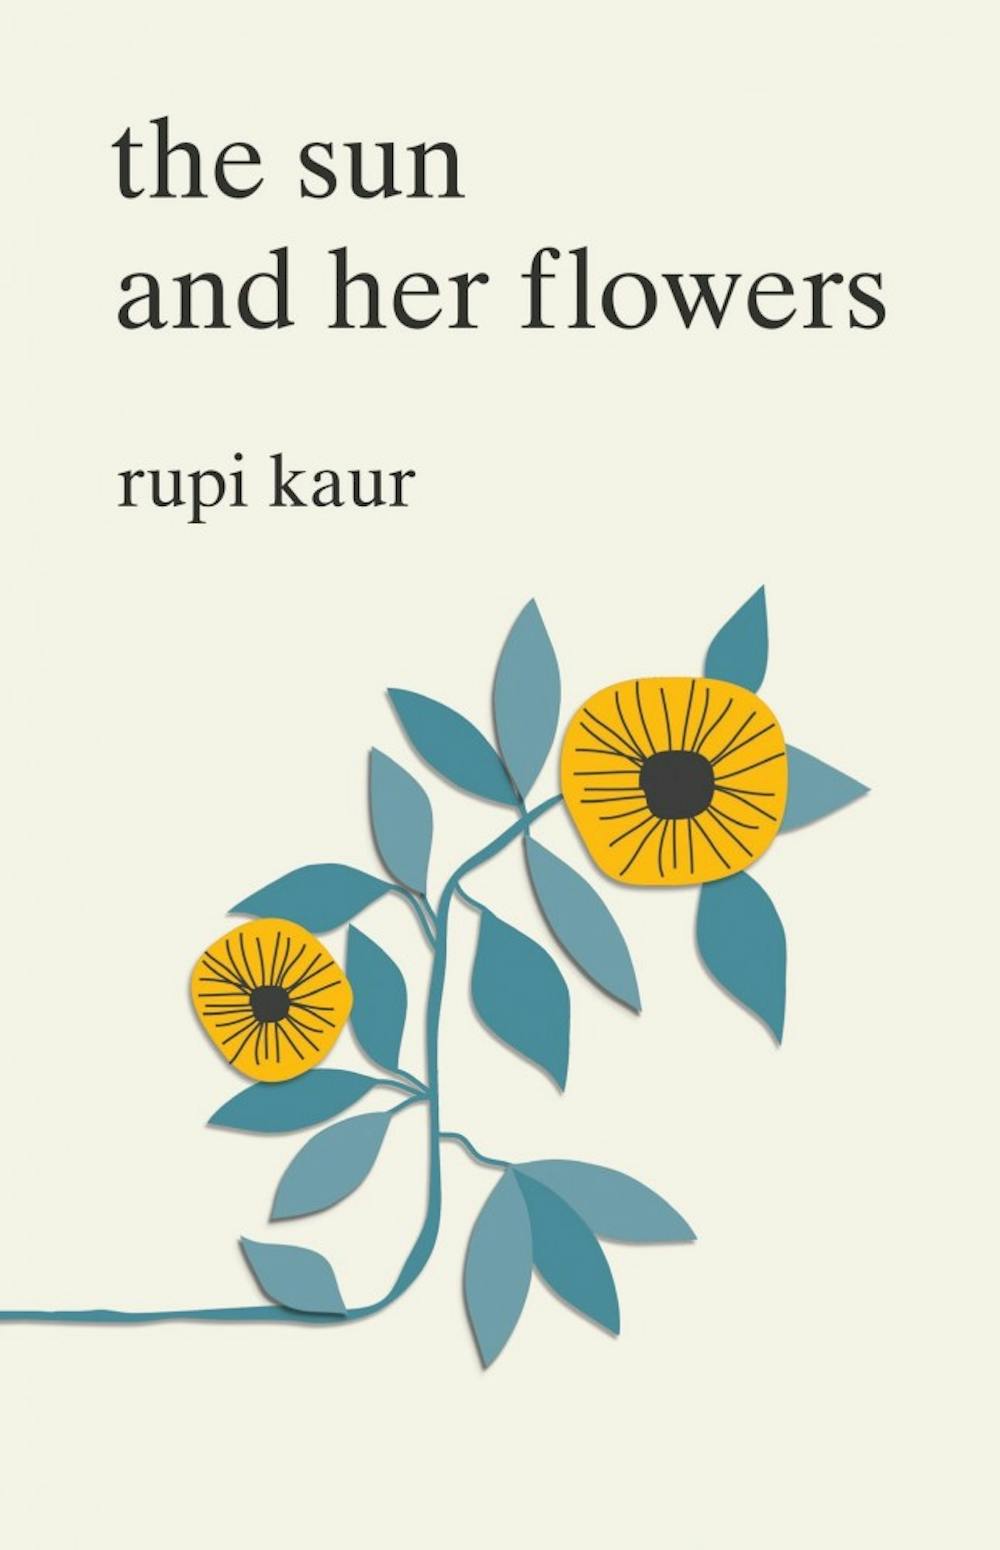 Kaur's collection of poetry has the capacity to mend and heal broken hearts.